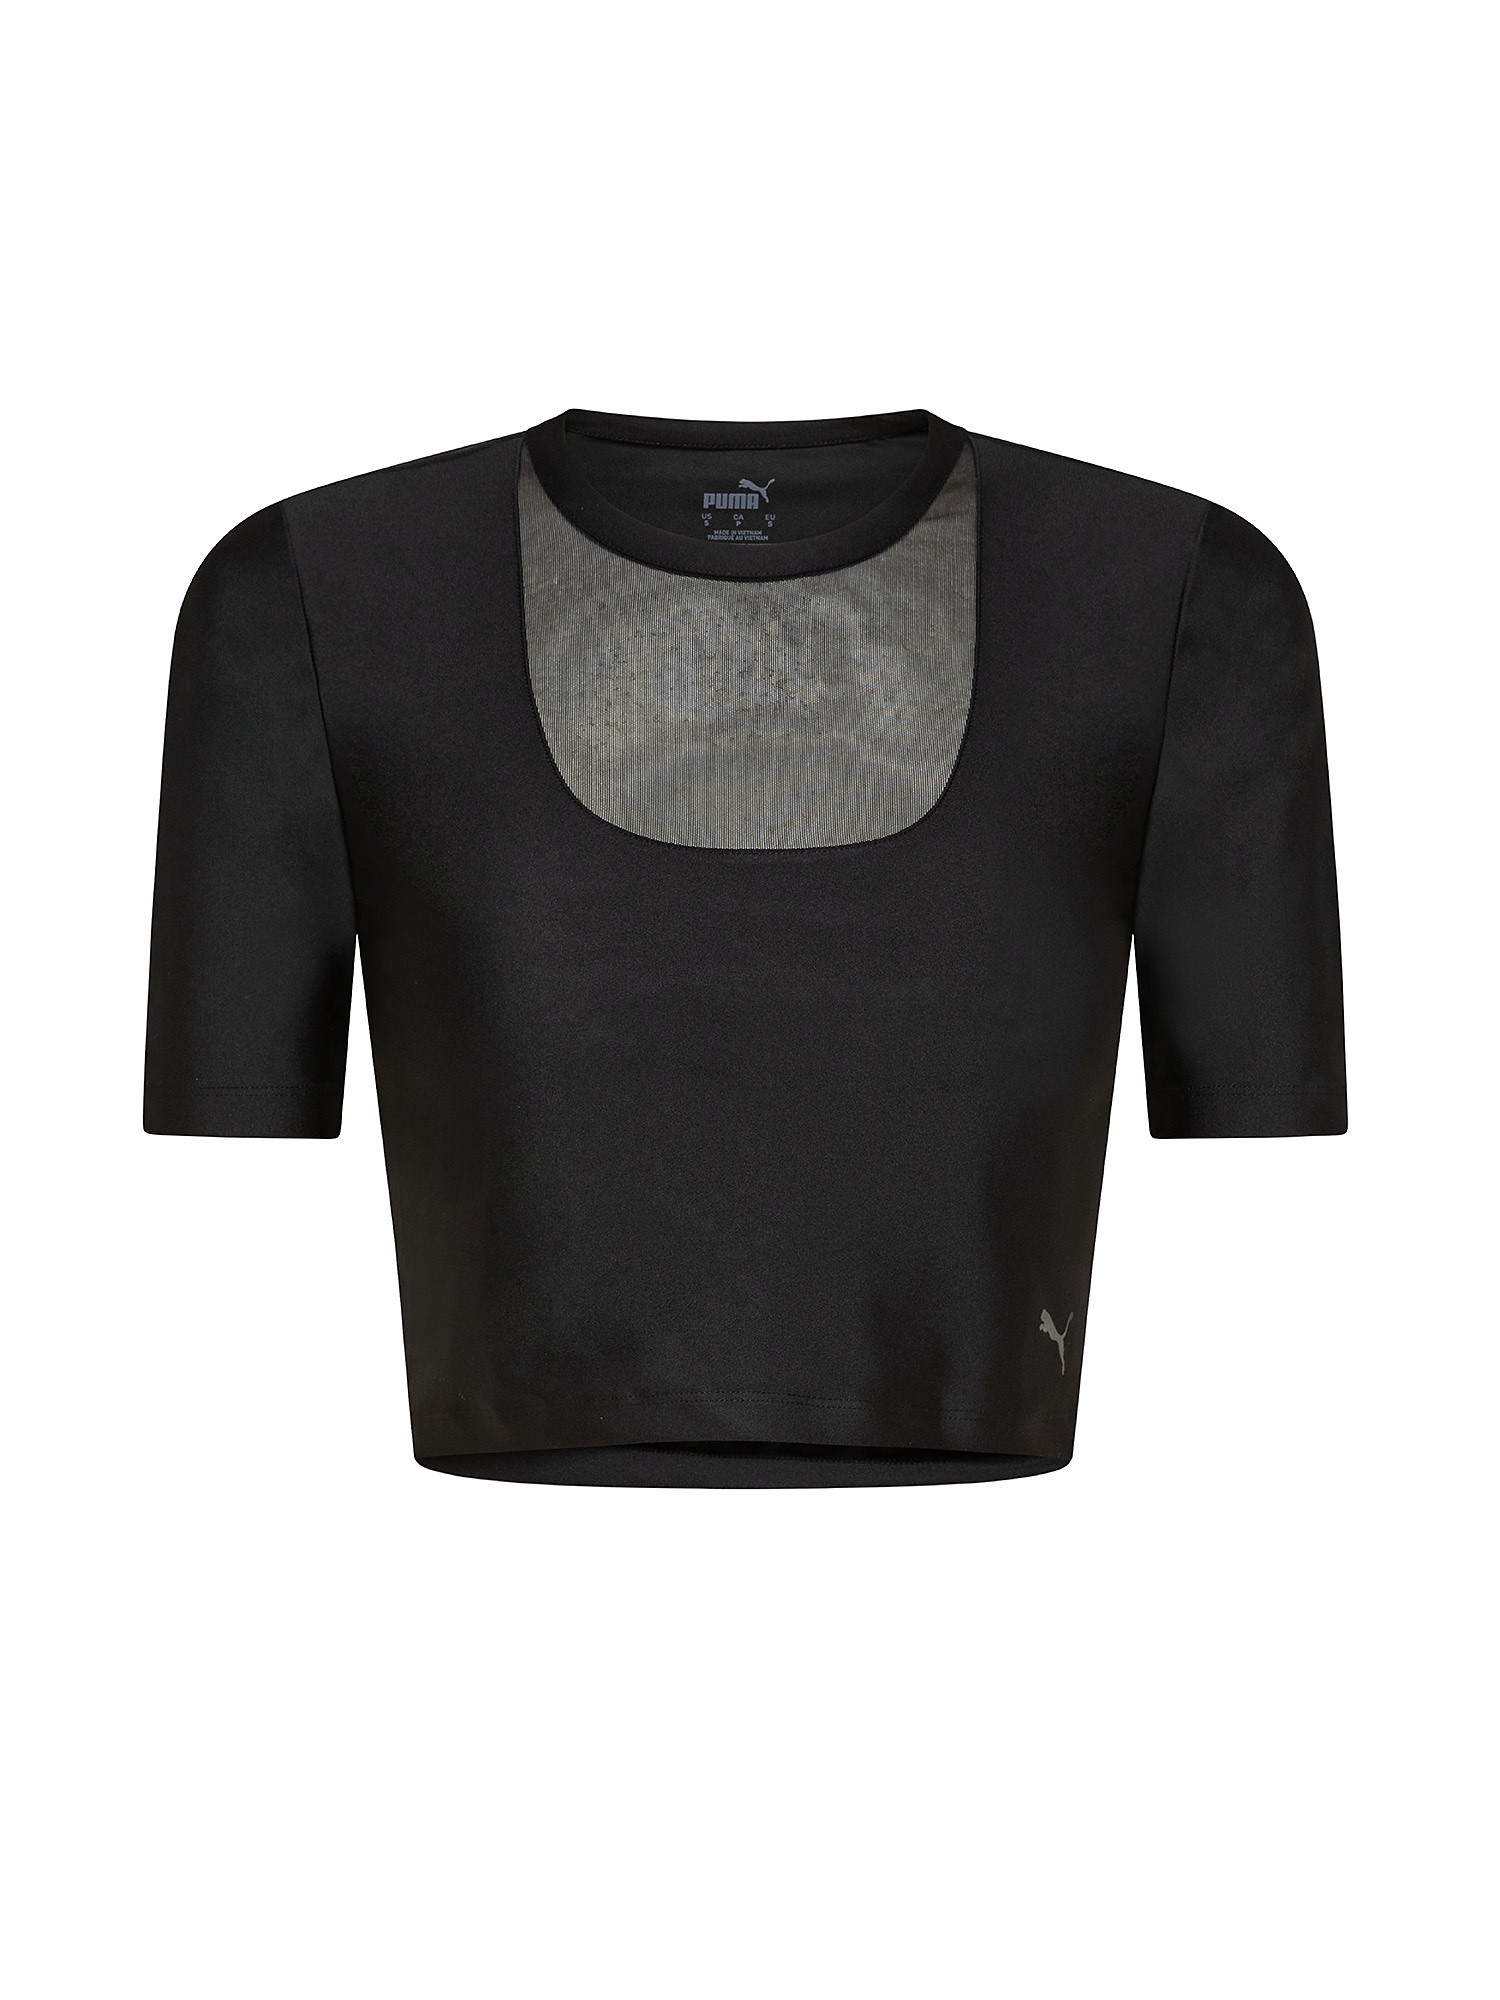 Top with mesh insert, Black, large image number 0